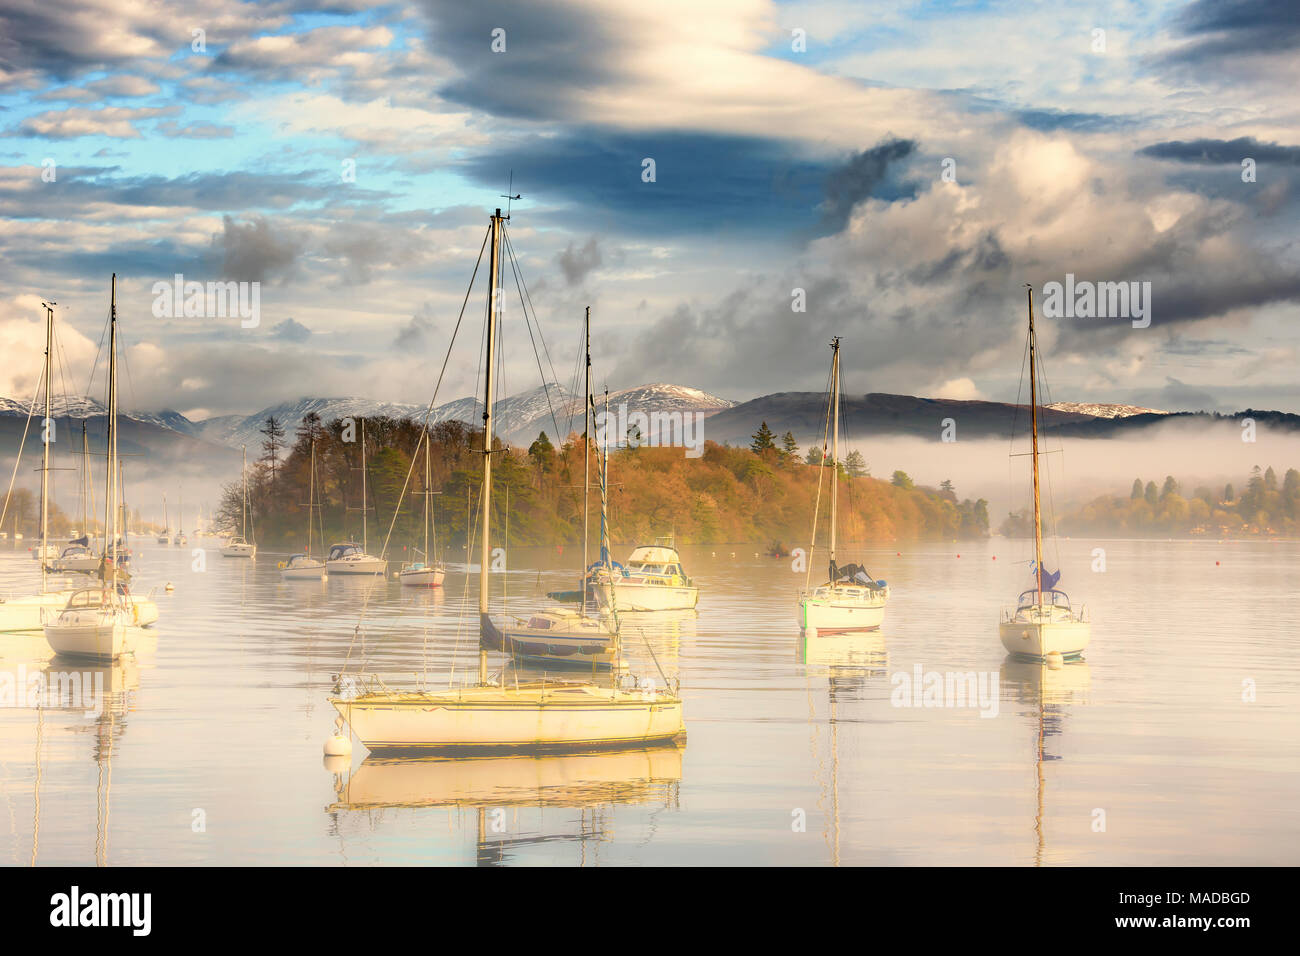 The Lake District National Park. Cumbria. The west shore of Windermere looking from the ferry dock. Early morning fog with boats in the foreground. Stock Photo